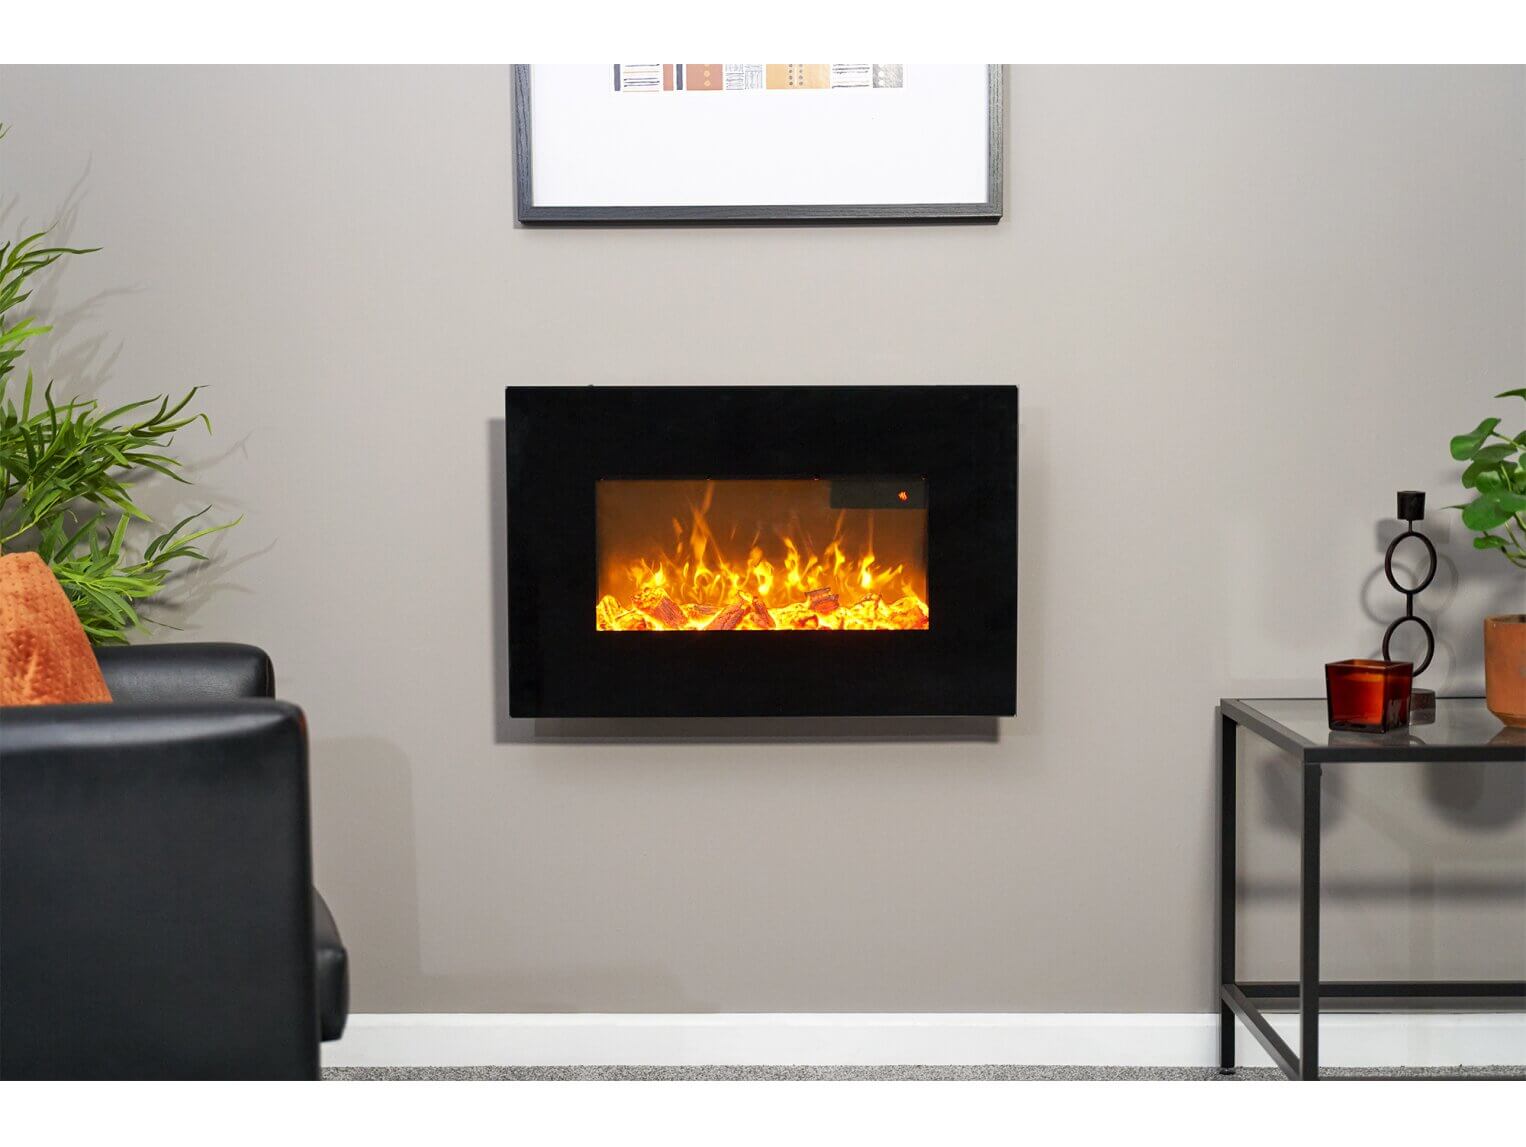 Sureflame WM-9334 Electric Wall Mounted Fire with Remote in Black, 26 Inch - Glowing Flames